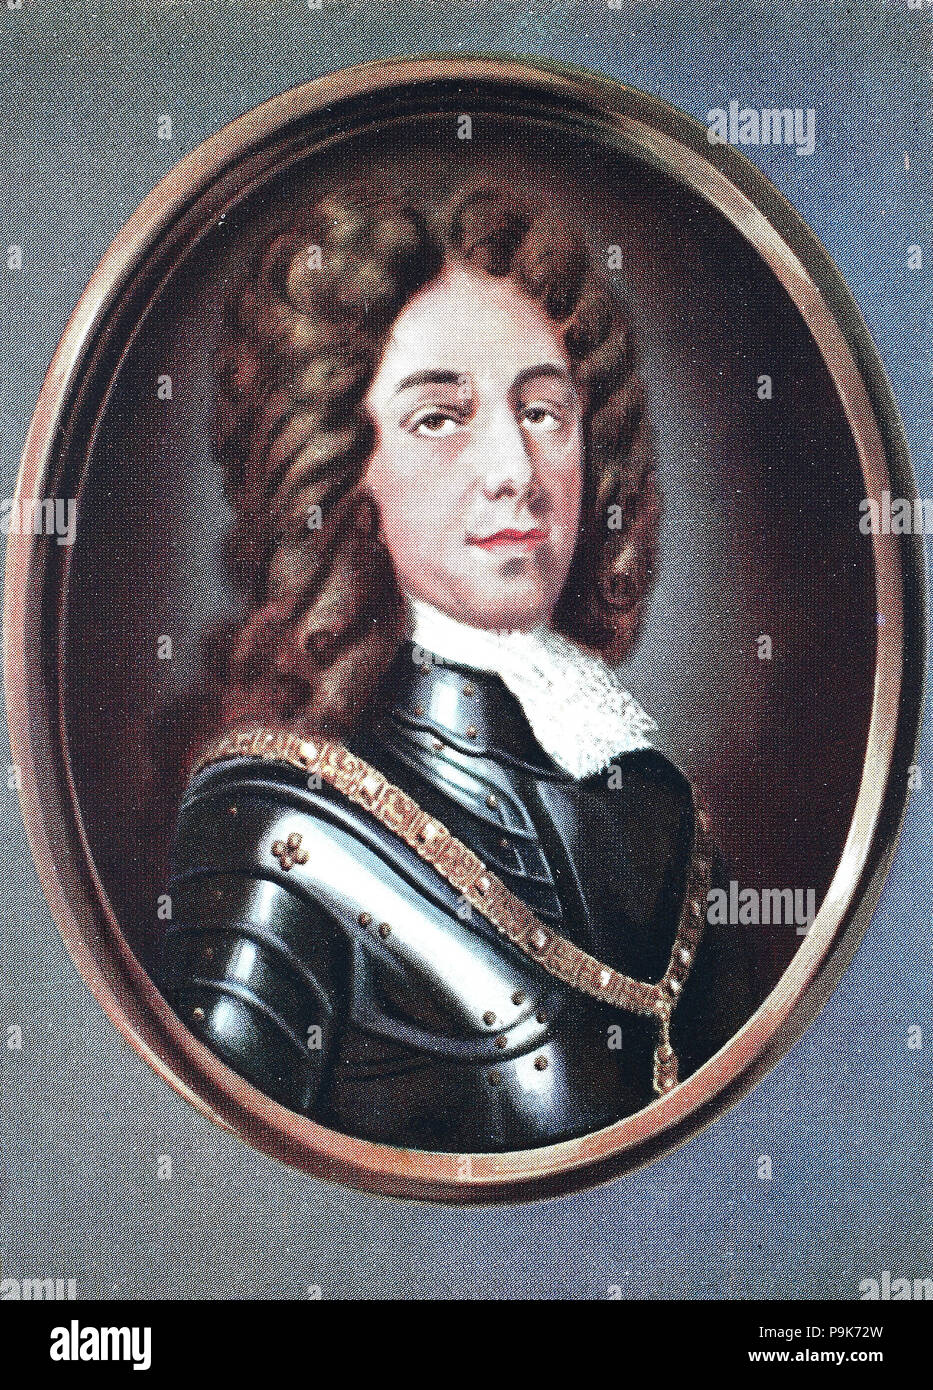 Prince Eugene of Savoy, FranÃ§ois-EugÃ¨ne de Savoie, Principe Eugenio di Savoia-Carignano, Prinz Eugen von Savoyen, 18 October 1663 â€“ 21 April 1736, was a general of the Imperial Army and statesman of the Holy Roman Empire and the Archduchy of Austria and one of the most successful military commanders in modern European history, rising to the highest offices of state at the Imperial court in Vienna, digital improved reproduction of an original print from the year 1900 Stock Photo